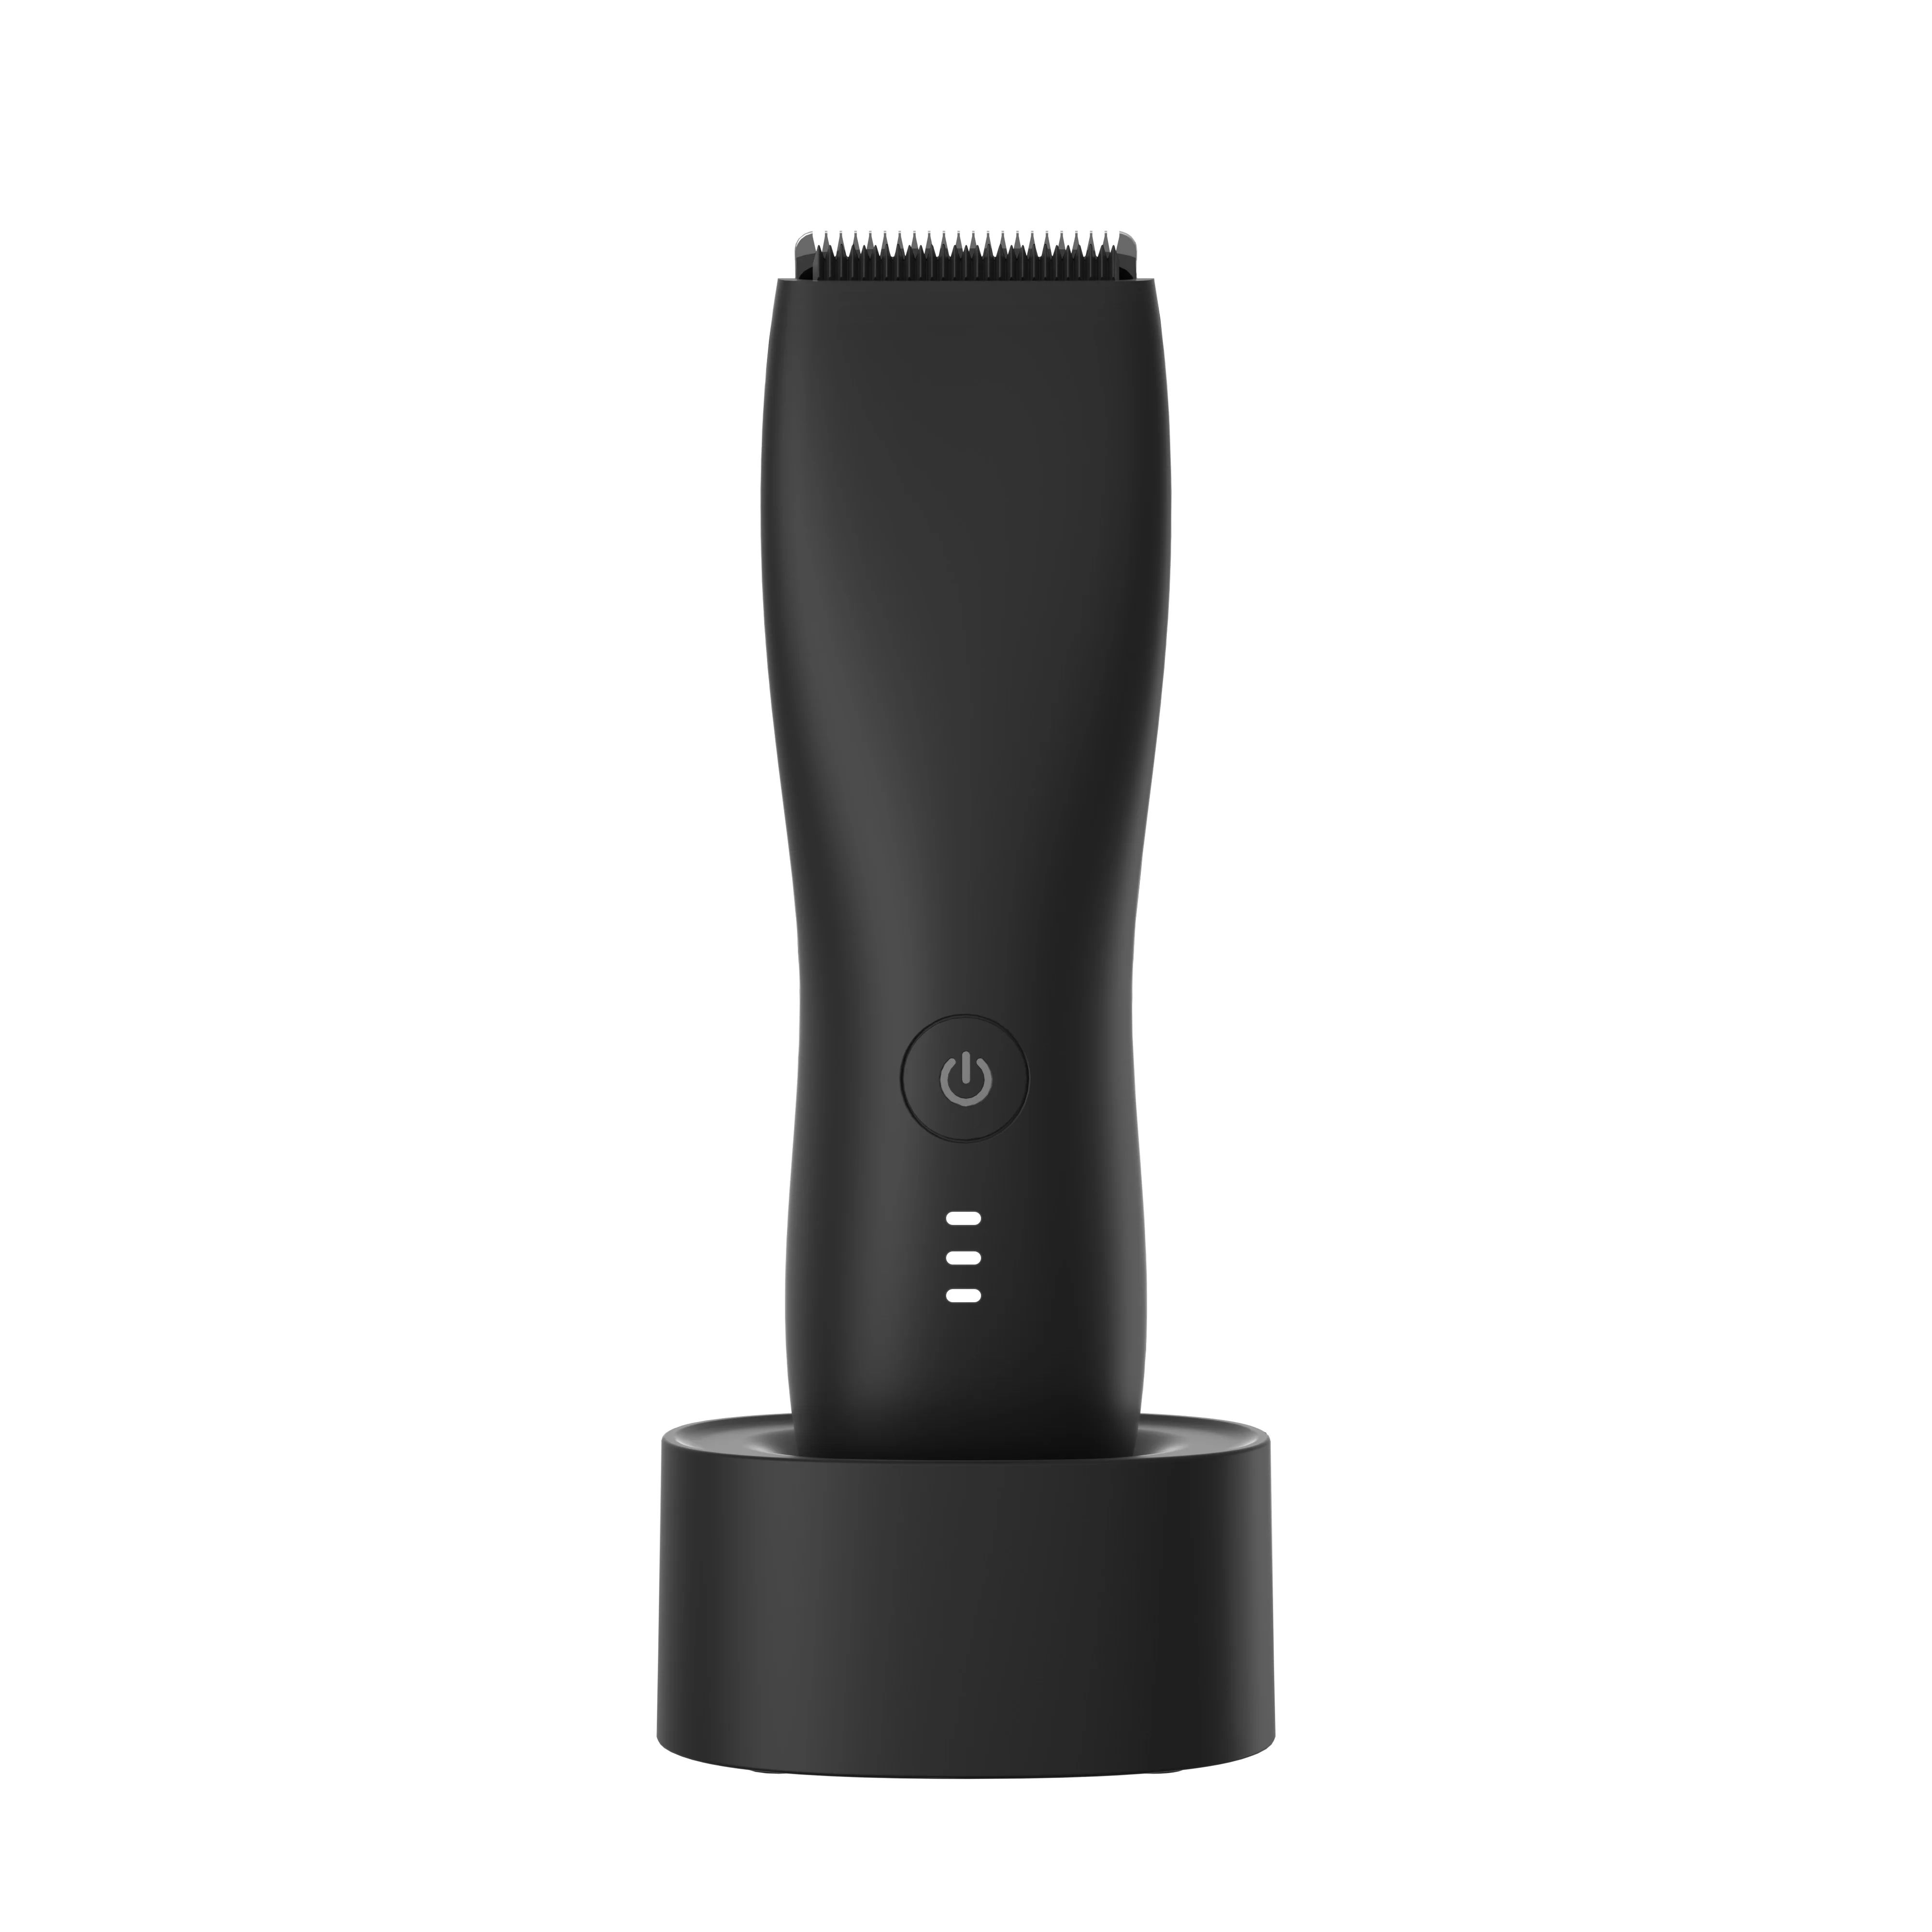 New Arrival SkinSafe For Sensitive Area Waterproof Electric Manscape Grooming Home Hotel Barber Hair Trimmer